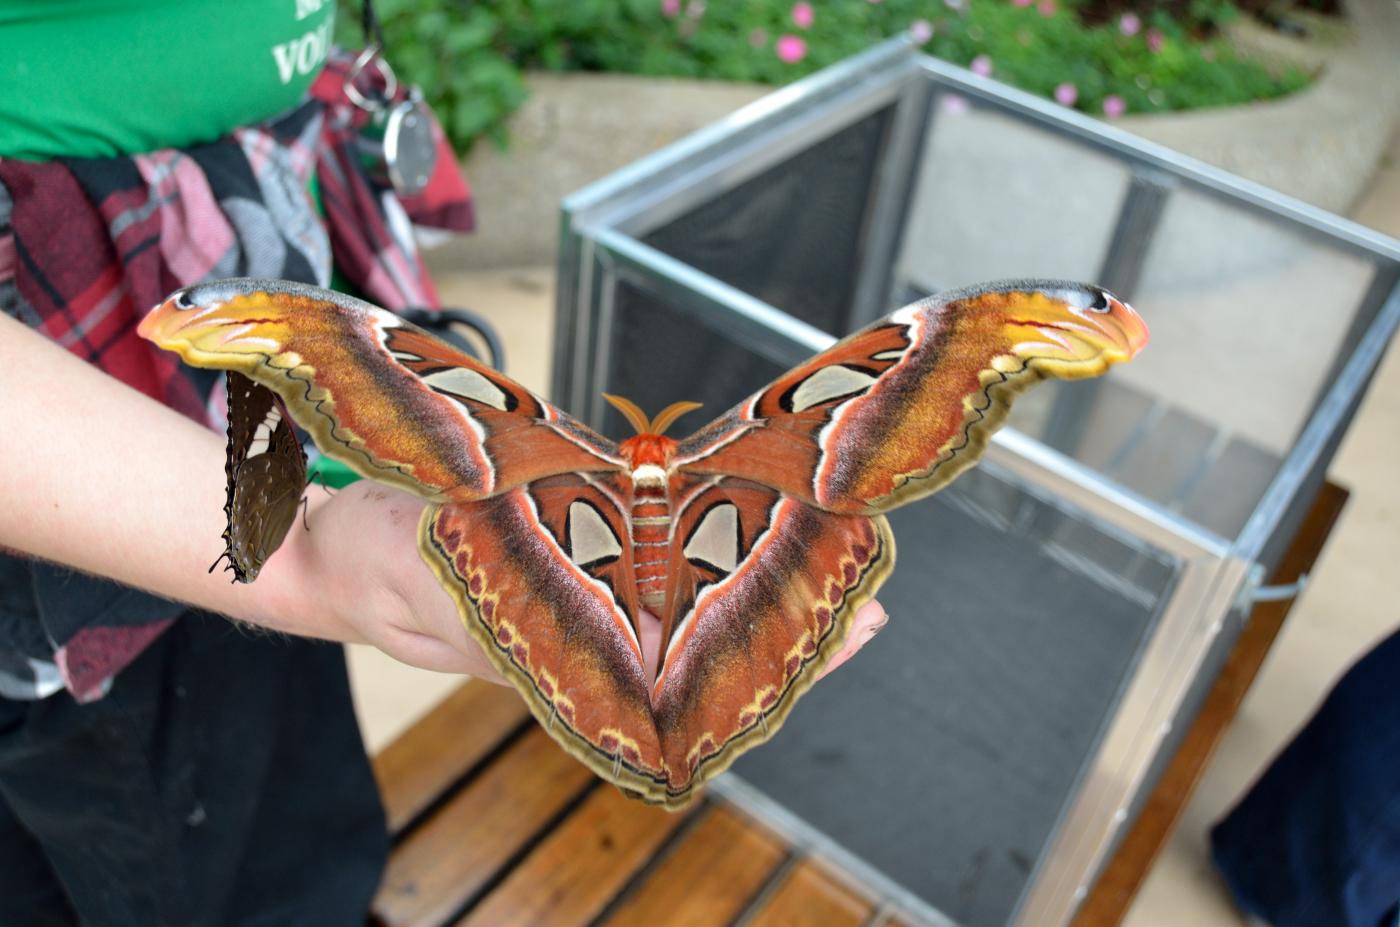 An adult Atlas Moth, which doesn't eat during its two-week lifespan.